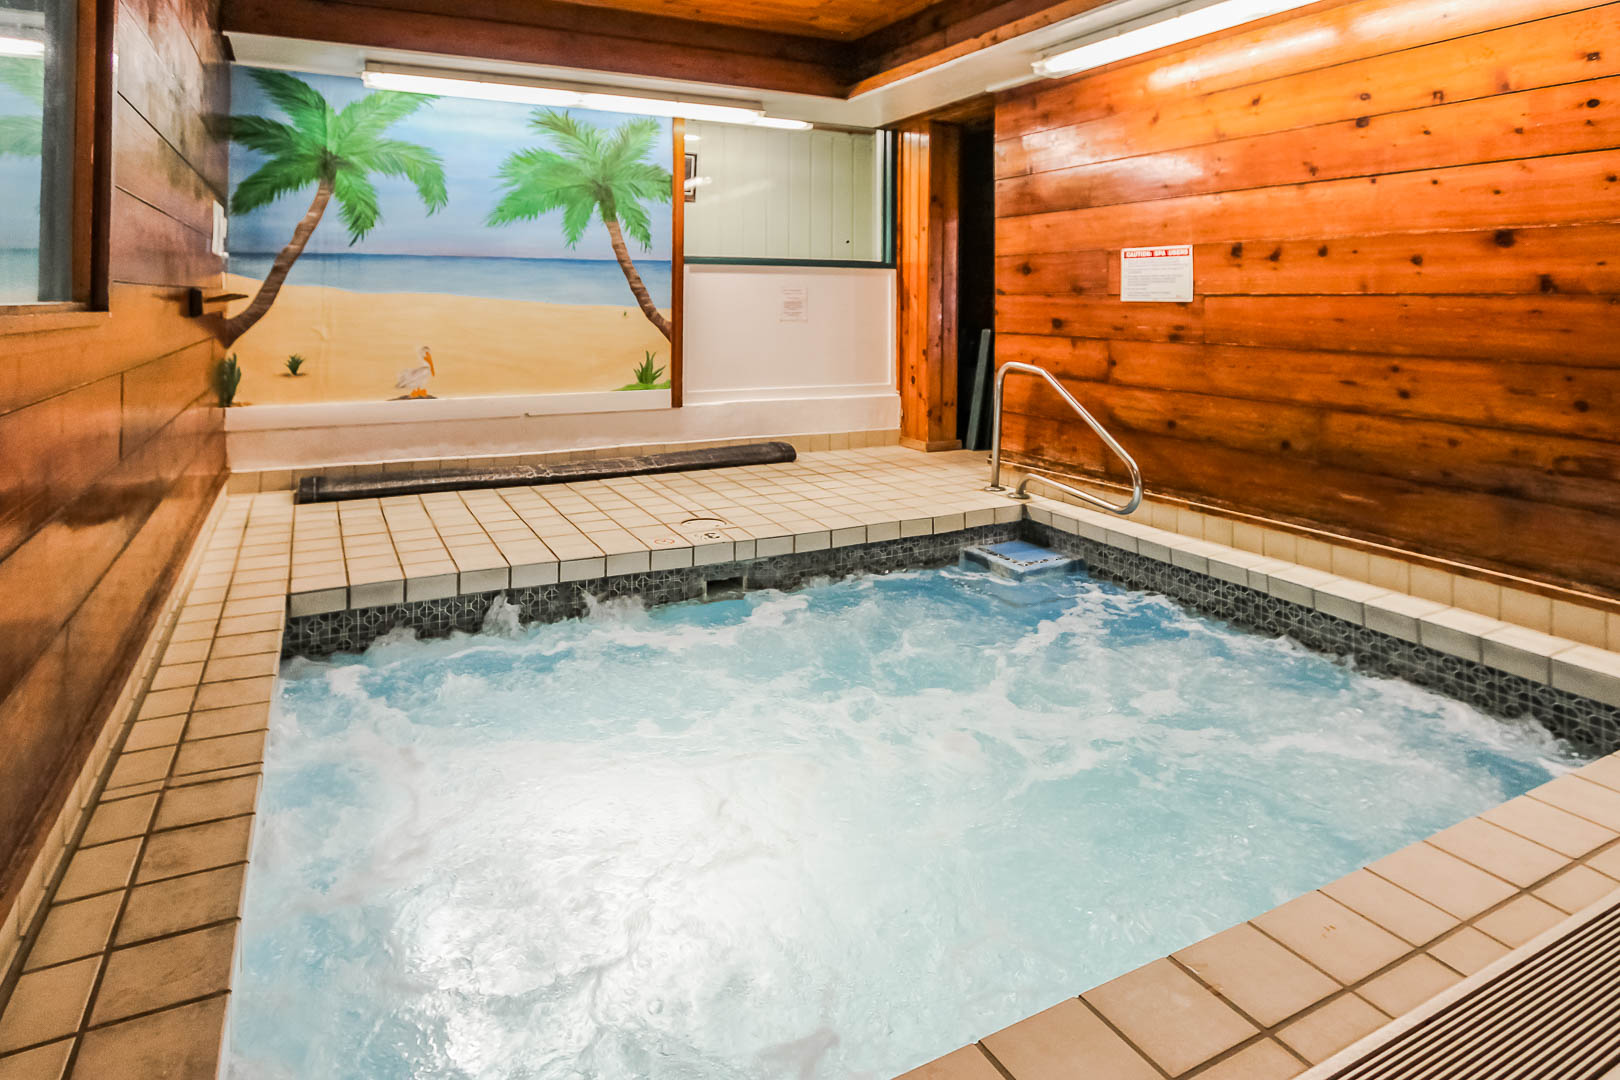 A massive indoor Jacuzzi tub at VRI's Village of Loon Mountain in New Hampshire.